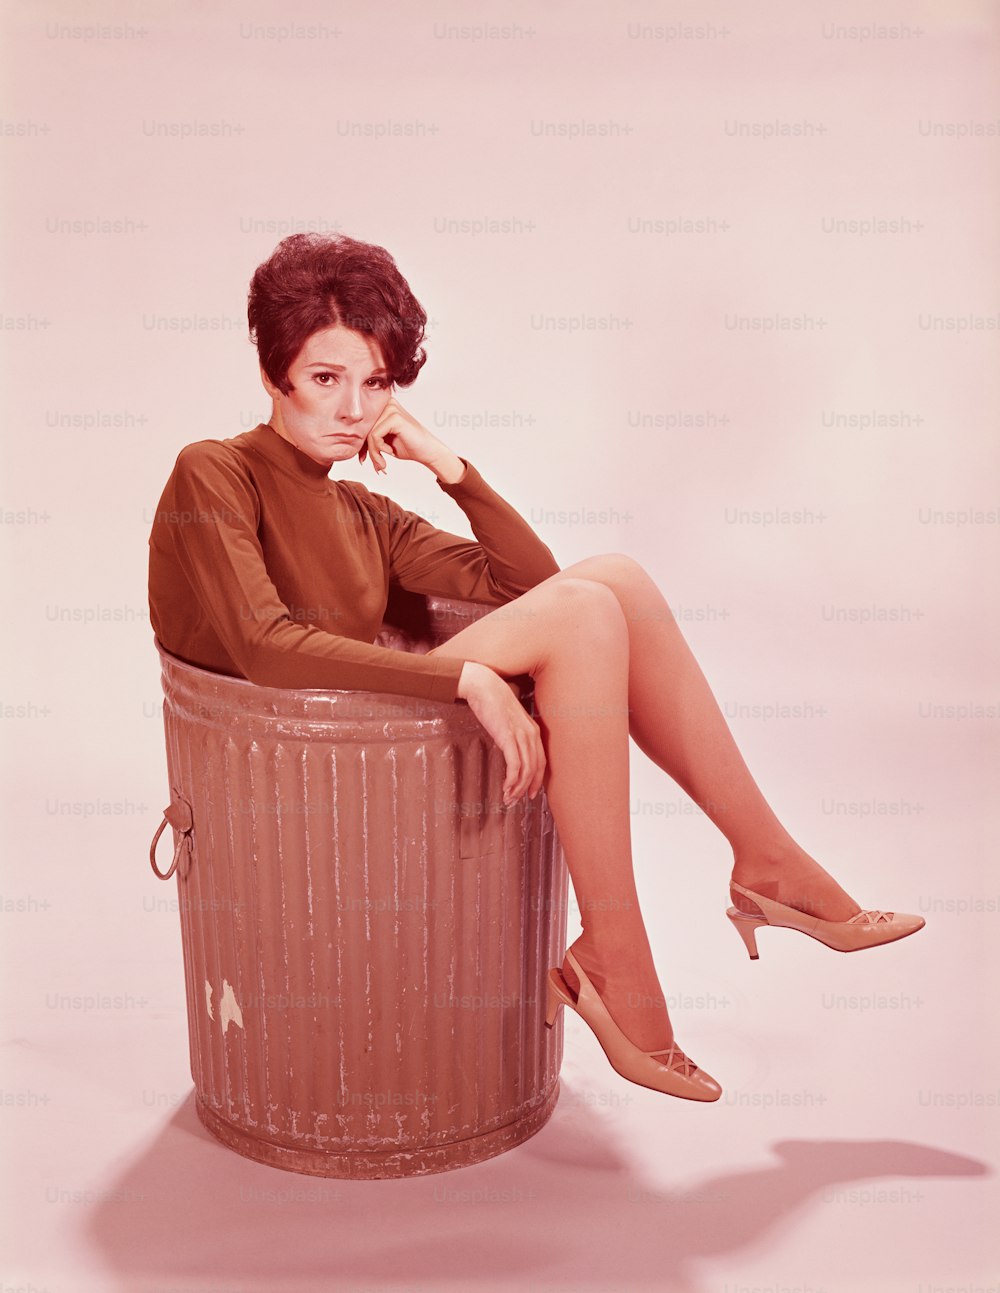 UNITED STATES - CIRCA 1960s:  Young woman in trash can with legs hanging out.